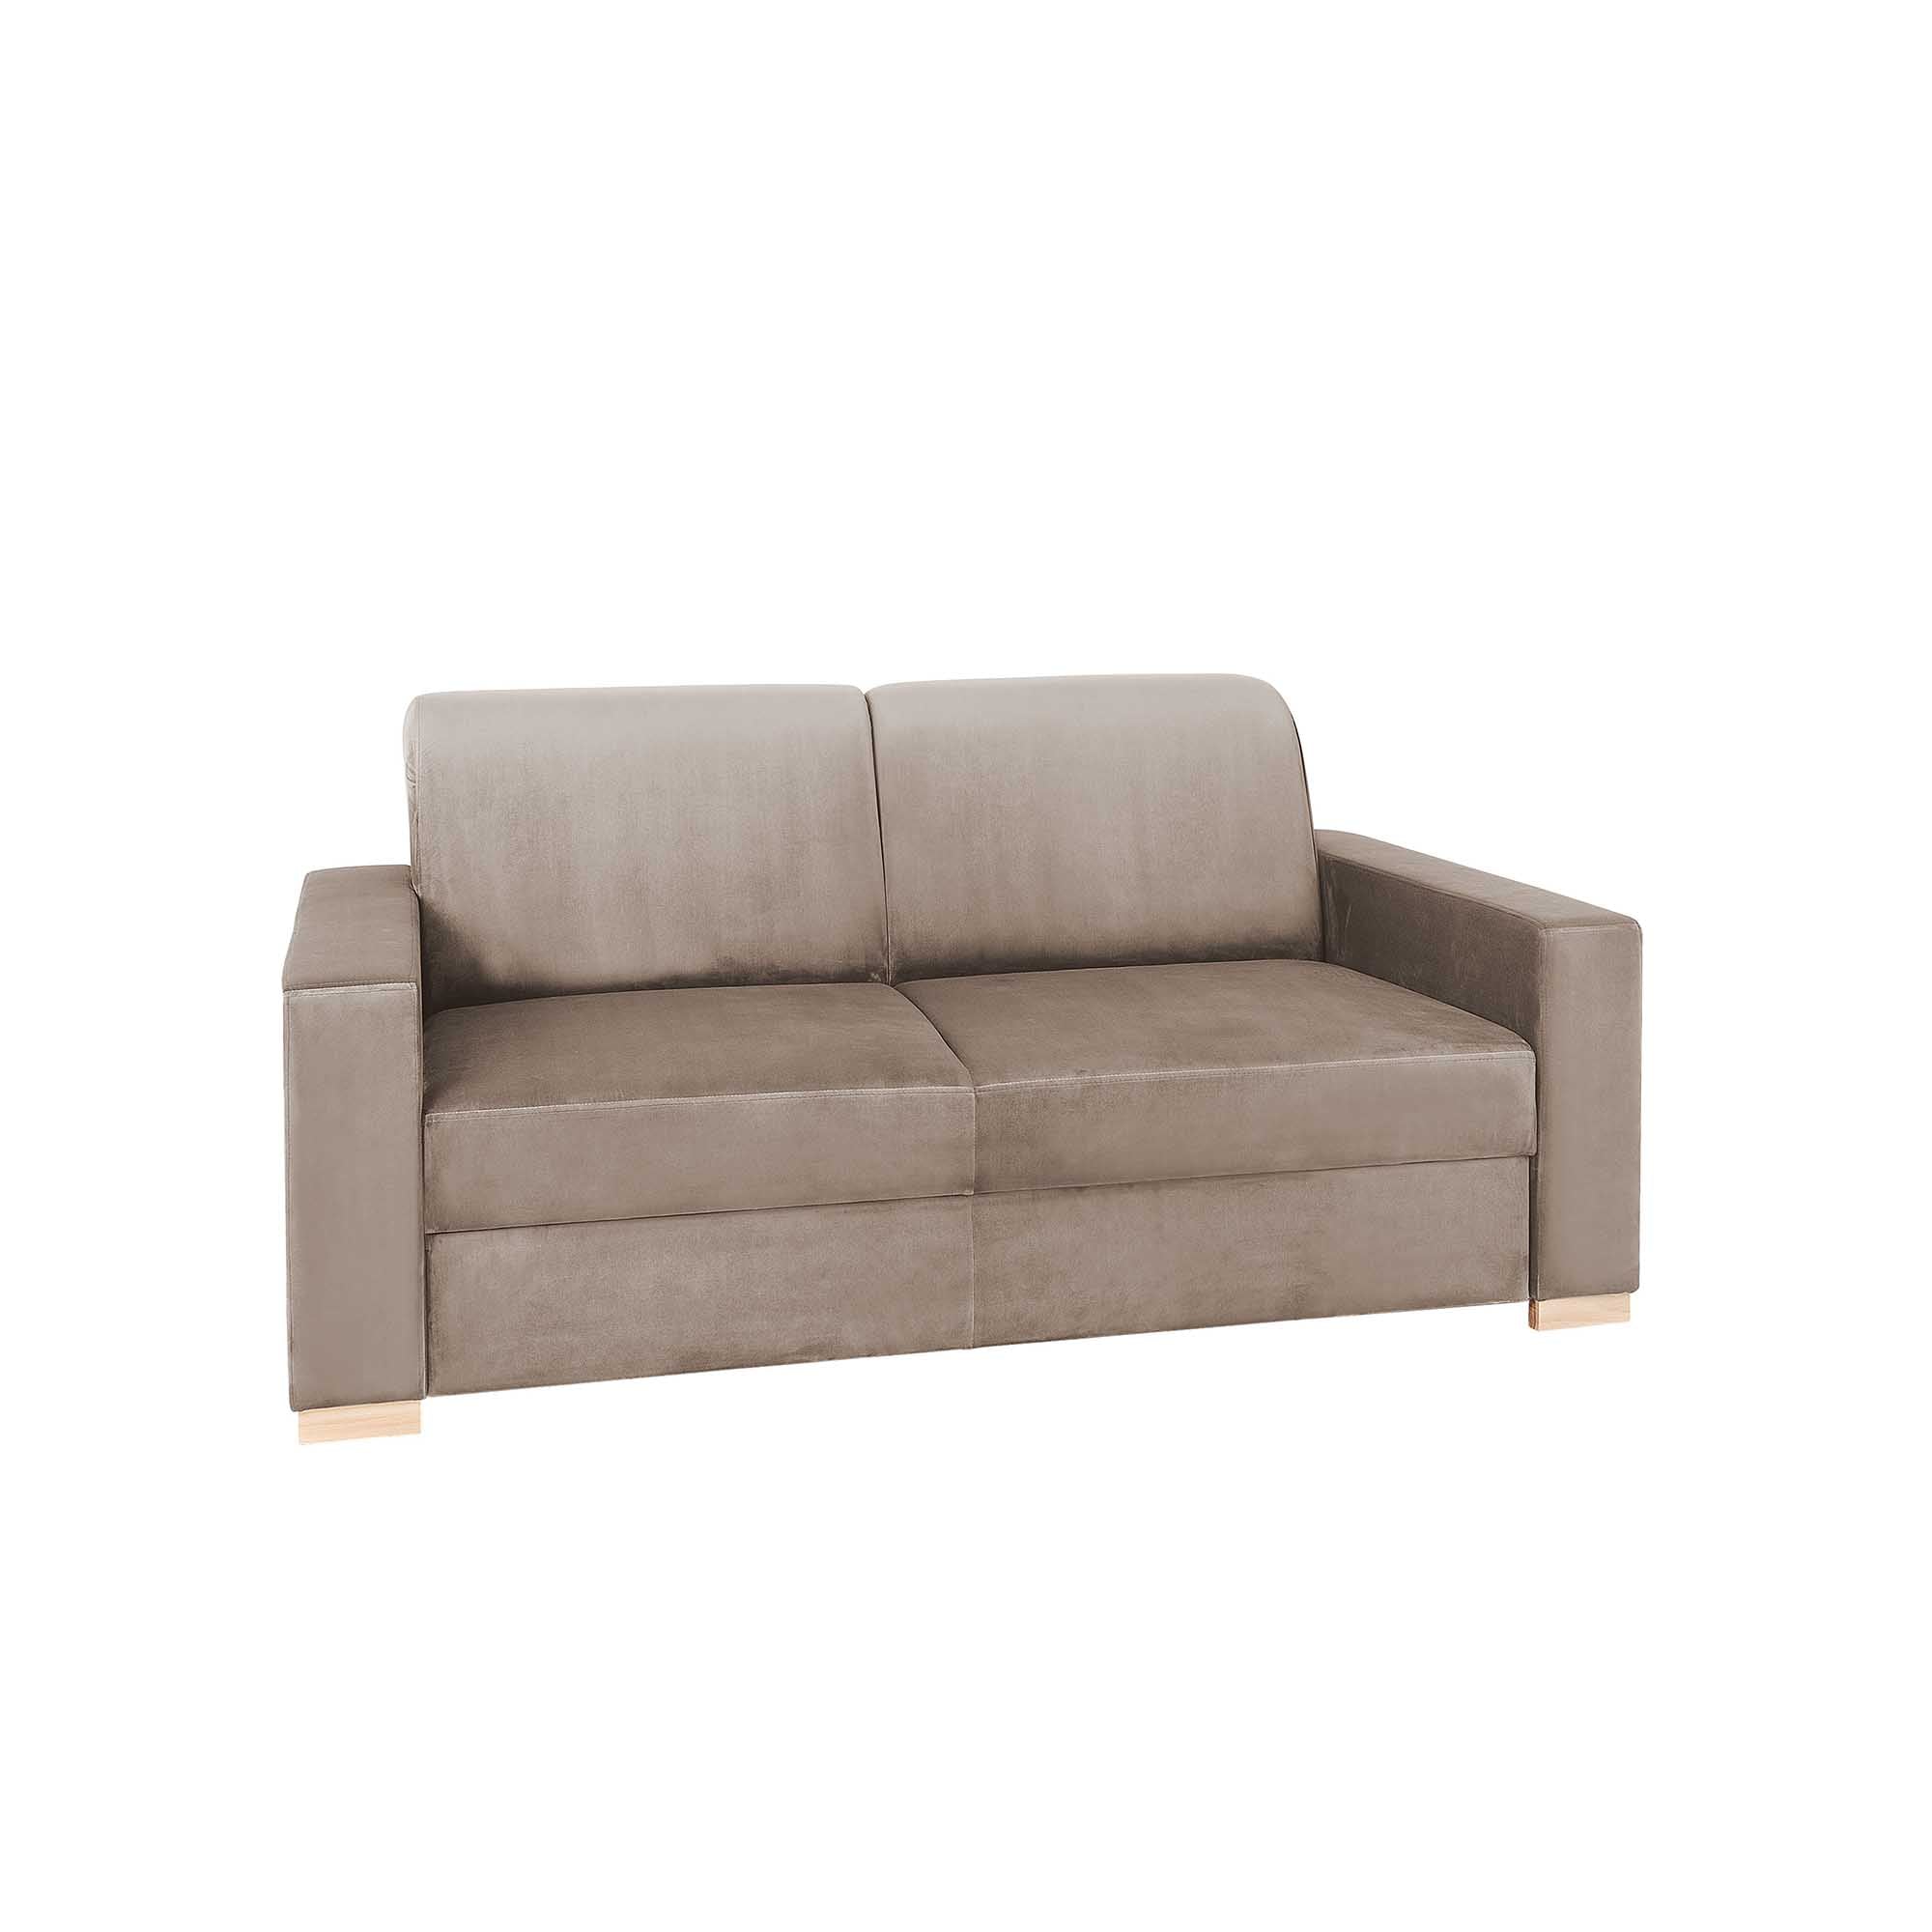 STABLE Sofa 2 Seaters upholstery colour beige